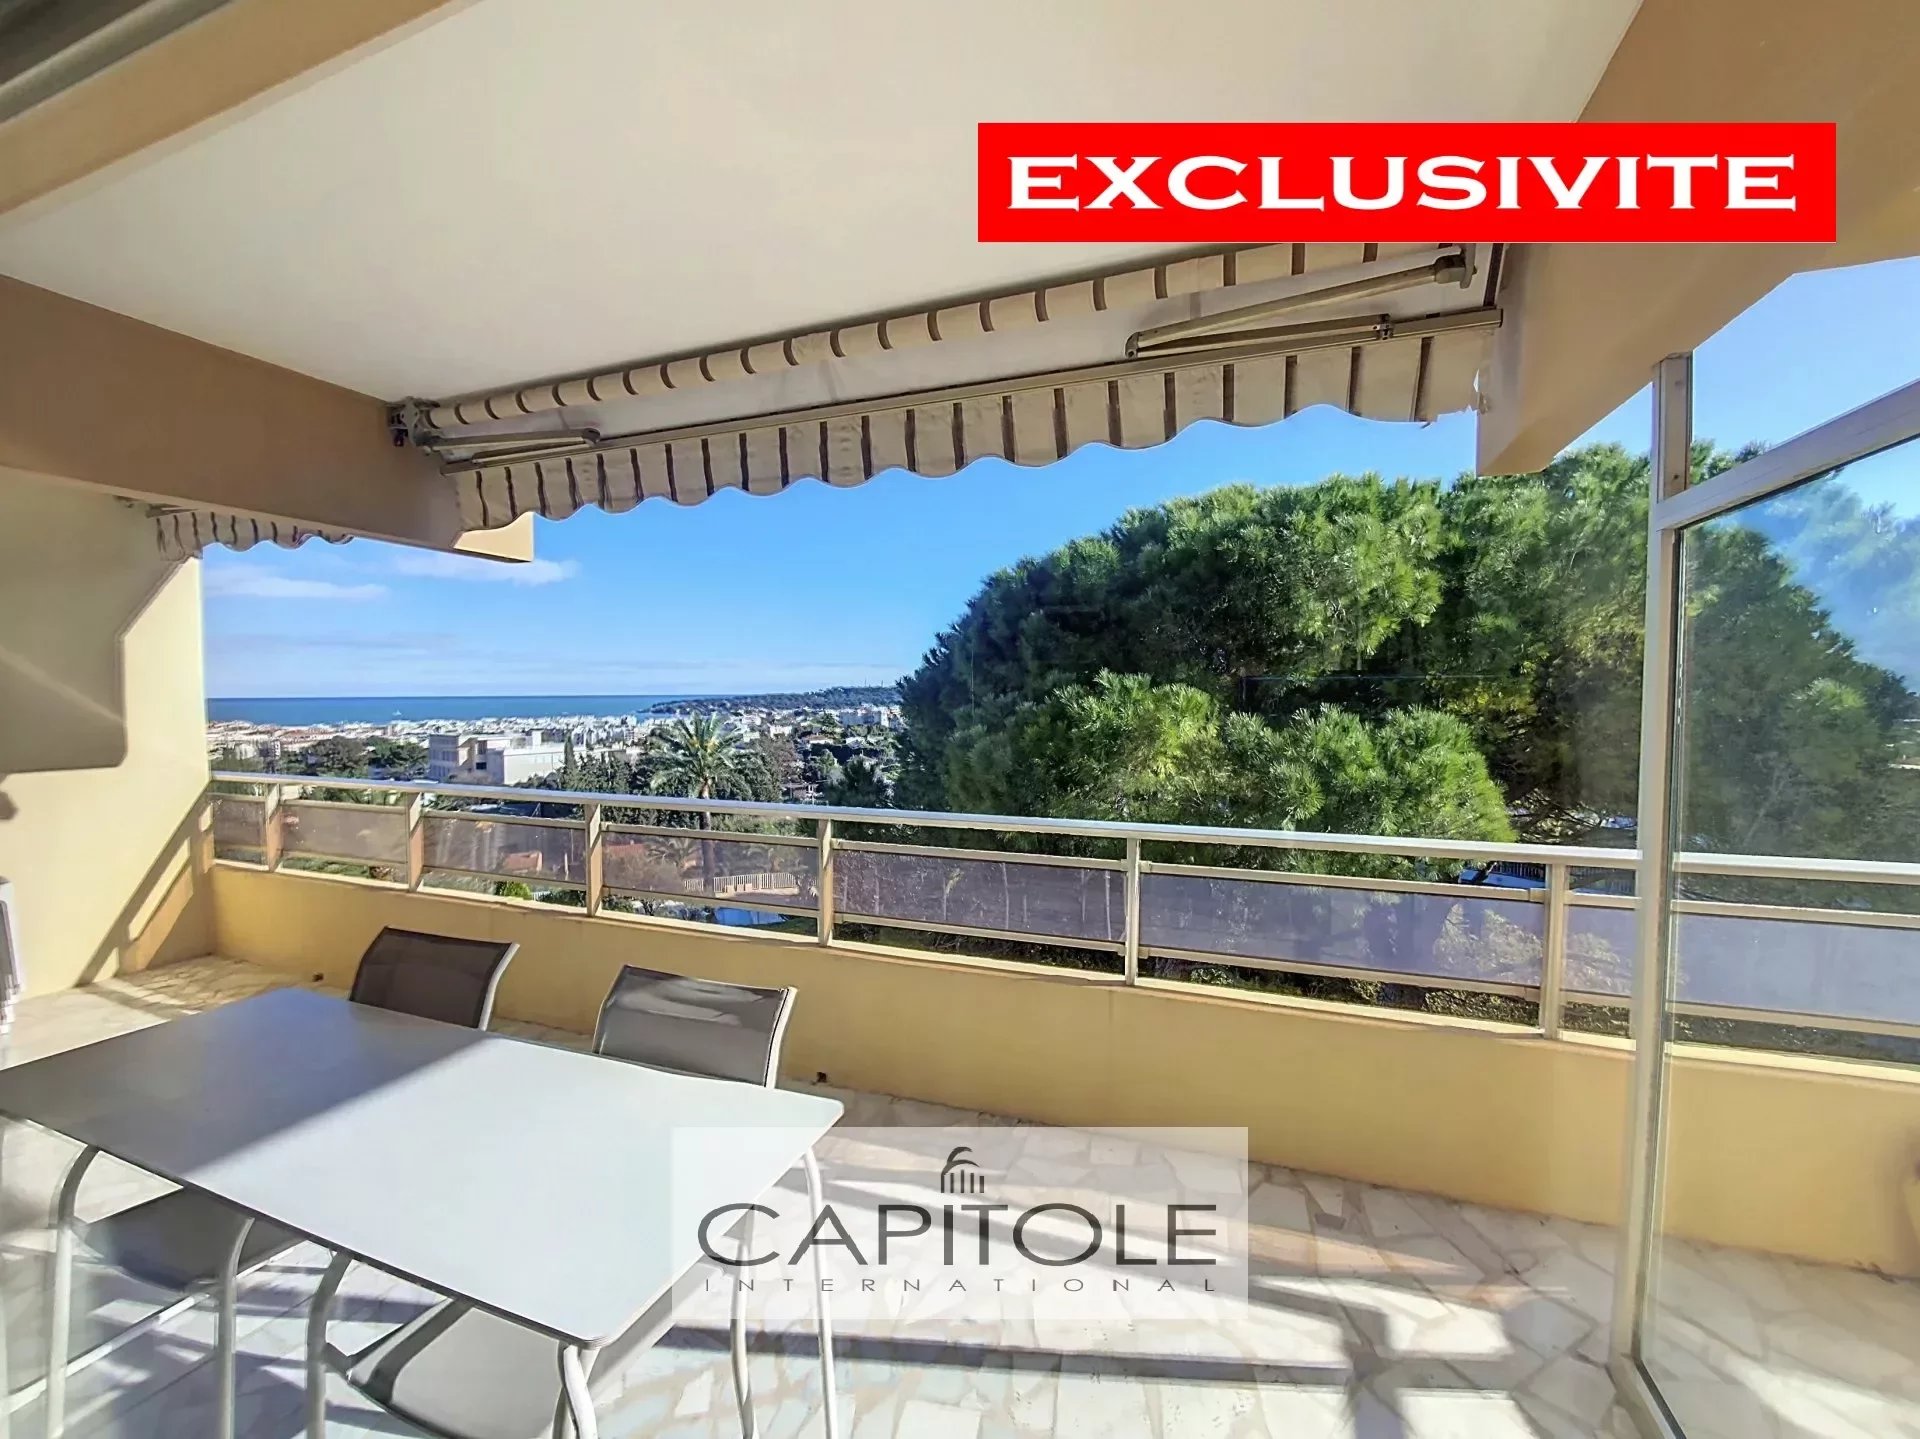 Antibes - Sole agent property : panoramic sea view, 2-bedroom corner apartement with large terrace